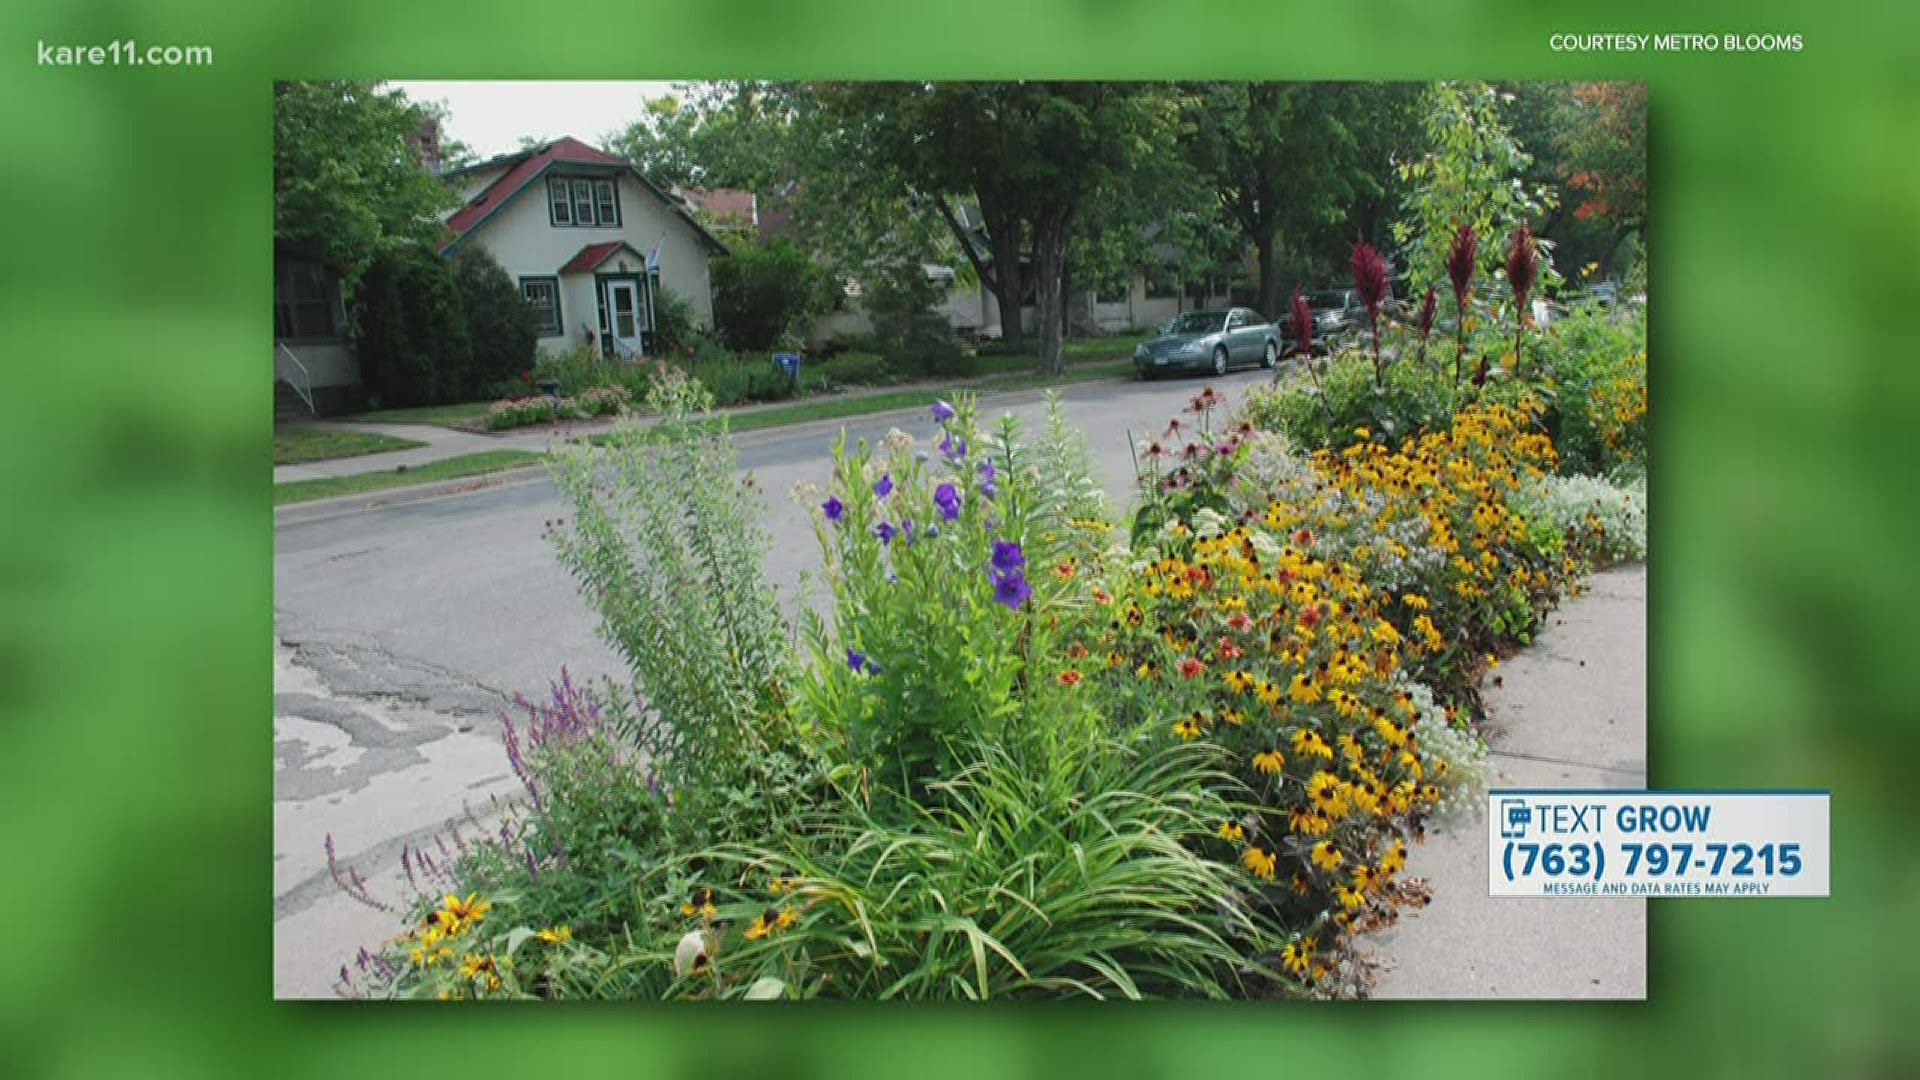 Boulevards typically provide harsh growing conditions. But there are plenty of flowers that can survive and thrive to create a beautiful boulevard garden